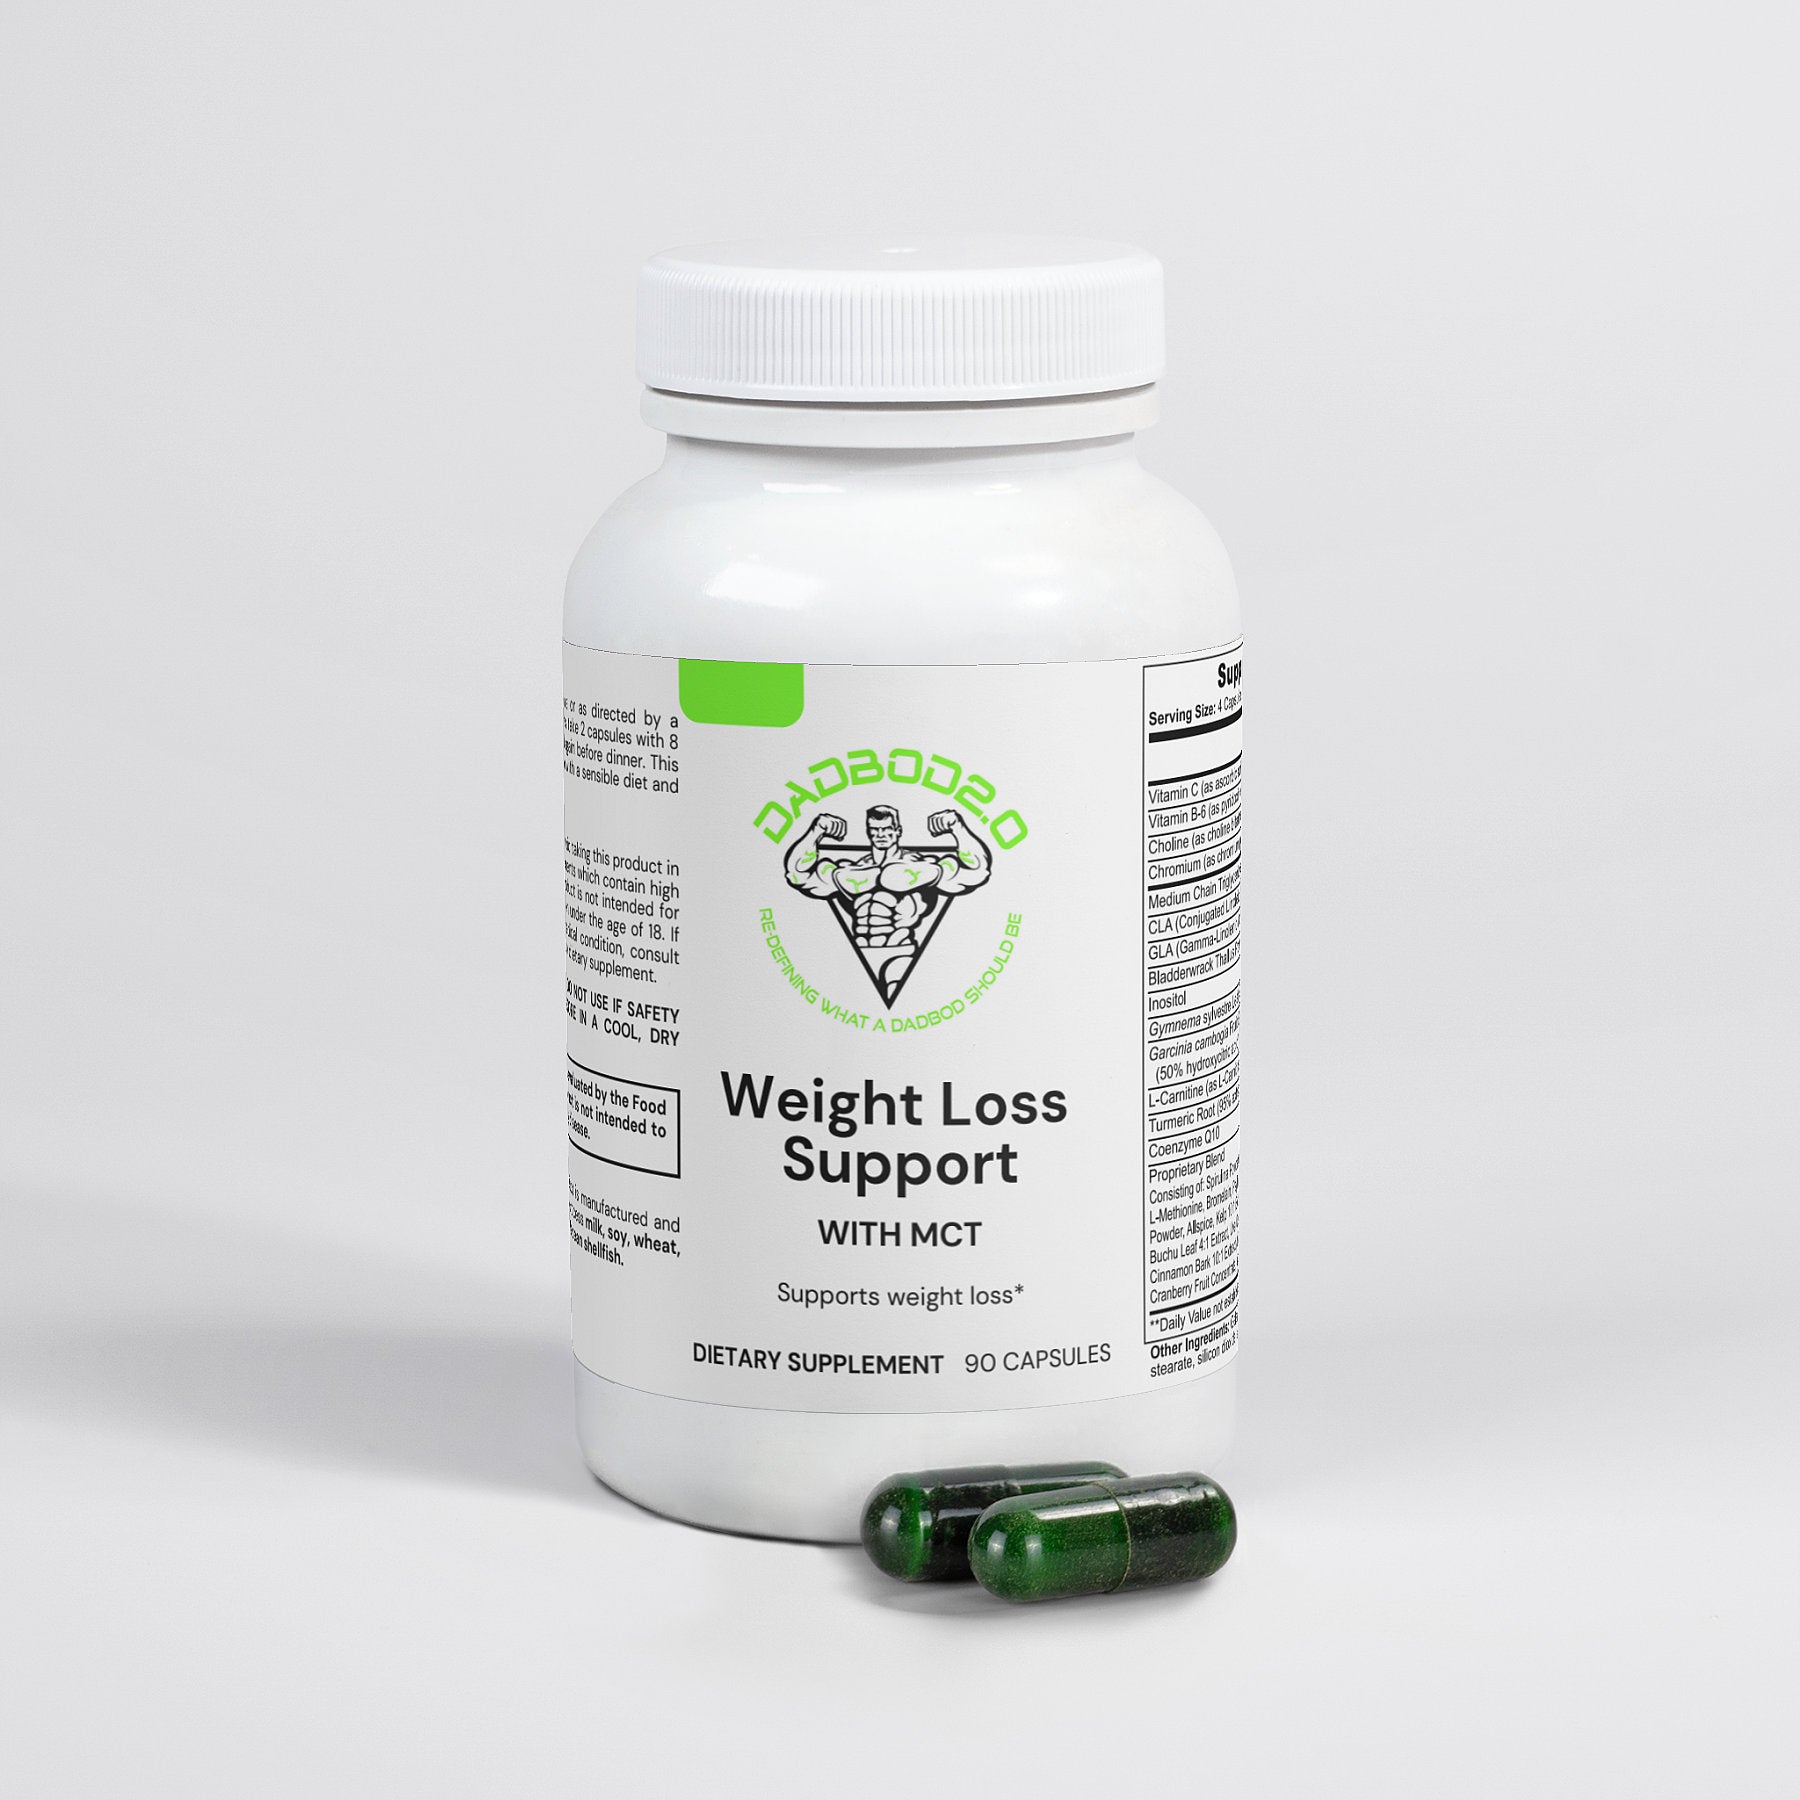 Weight Loss Support with MCT